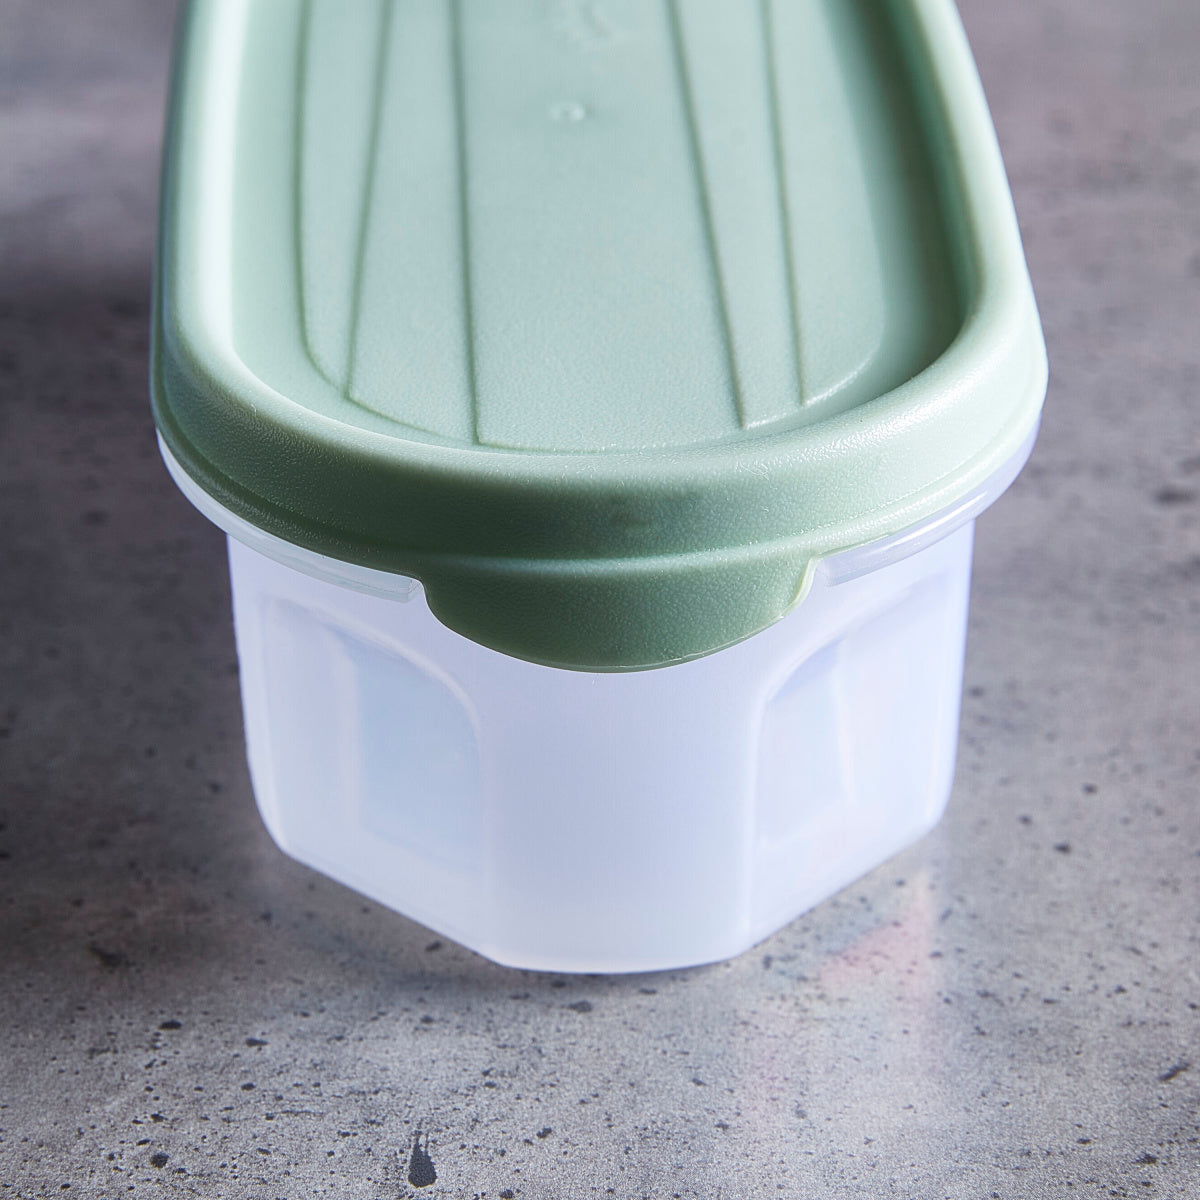 Easy Store Oval Container - 600 ml